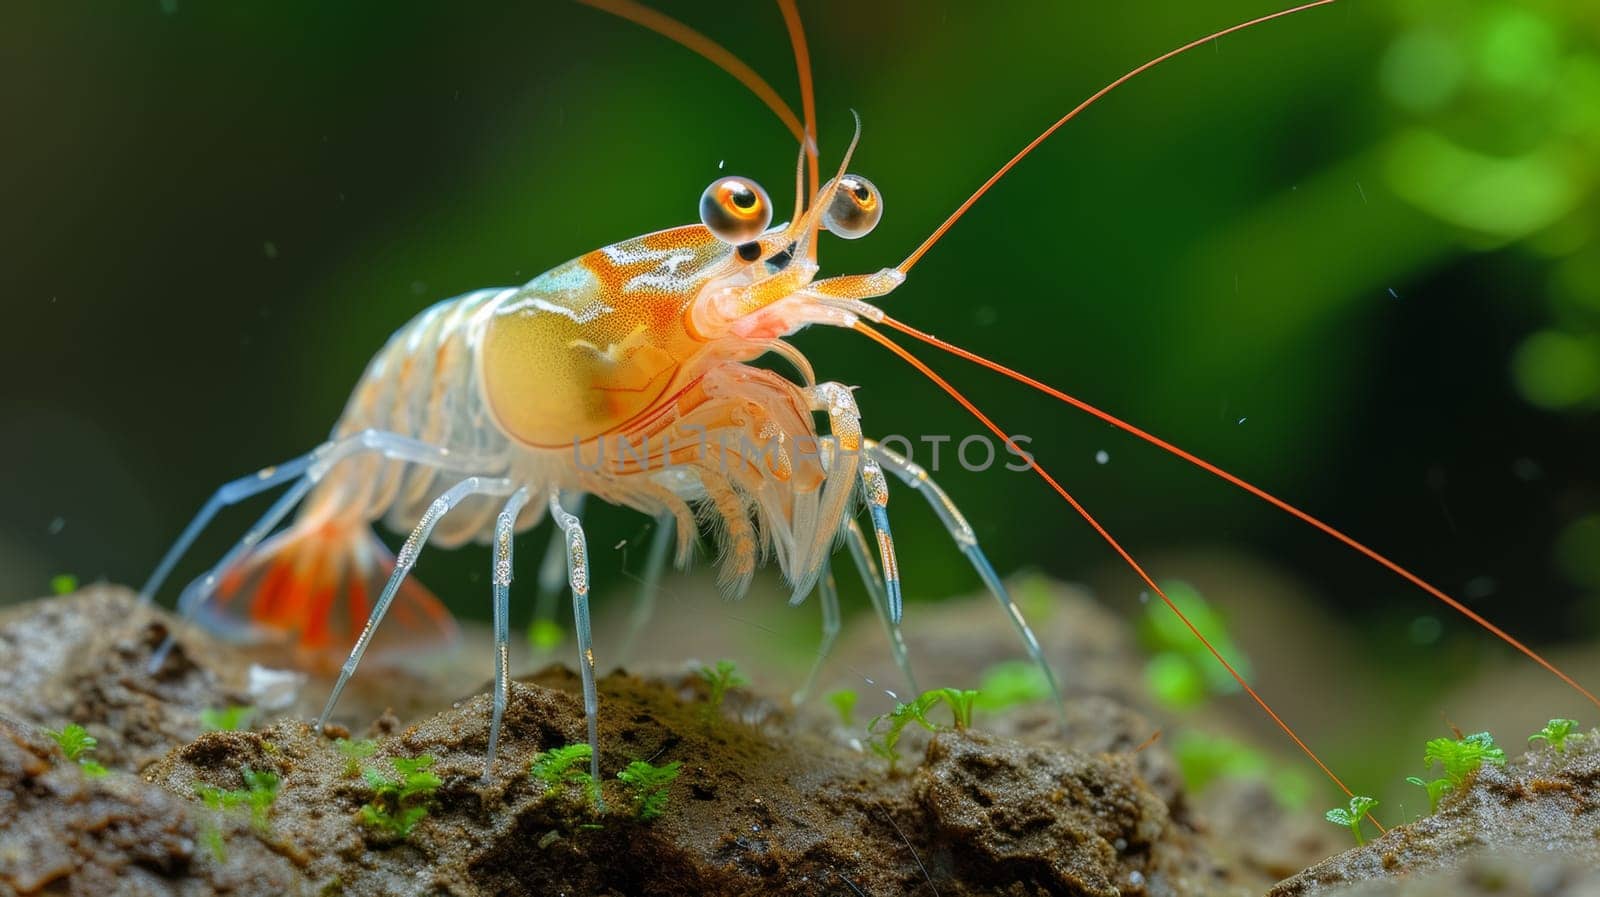 A shrimp with orange and white stripes on its body, AI by starush